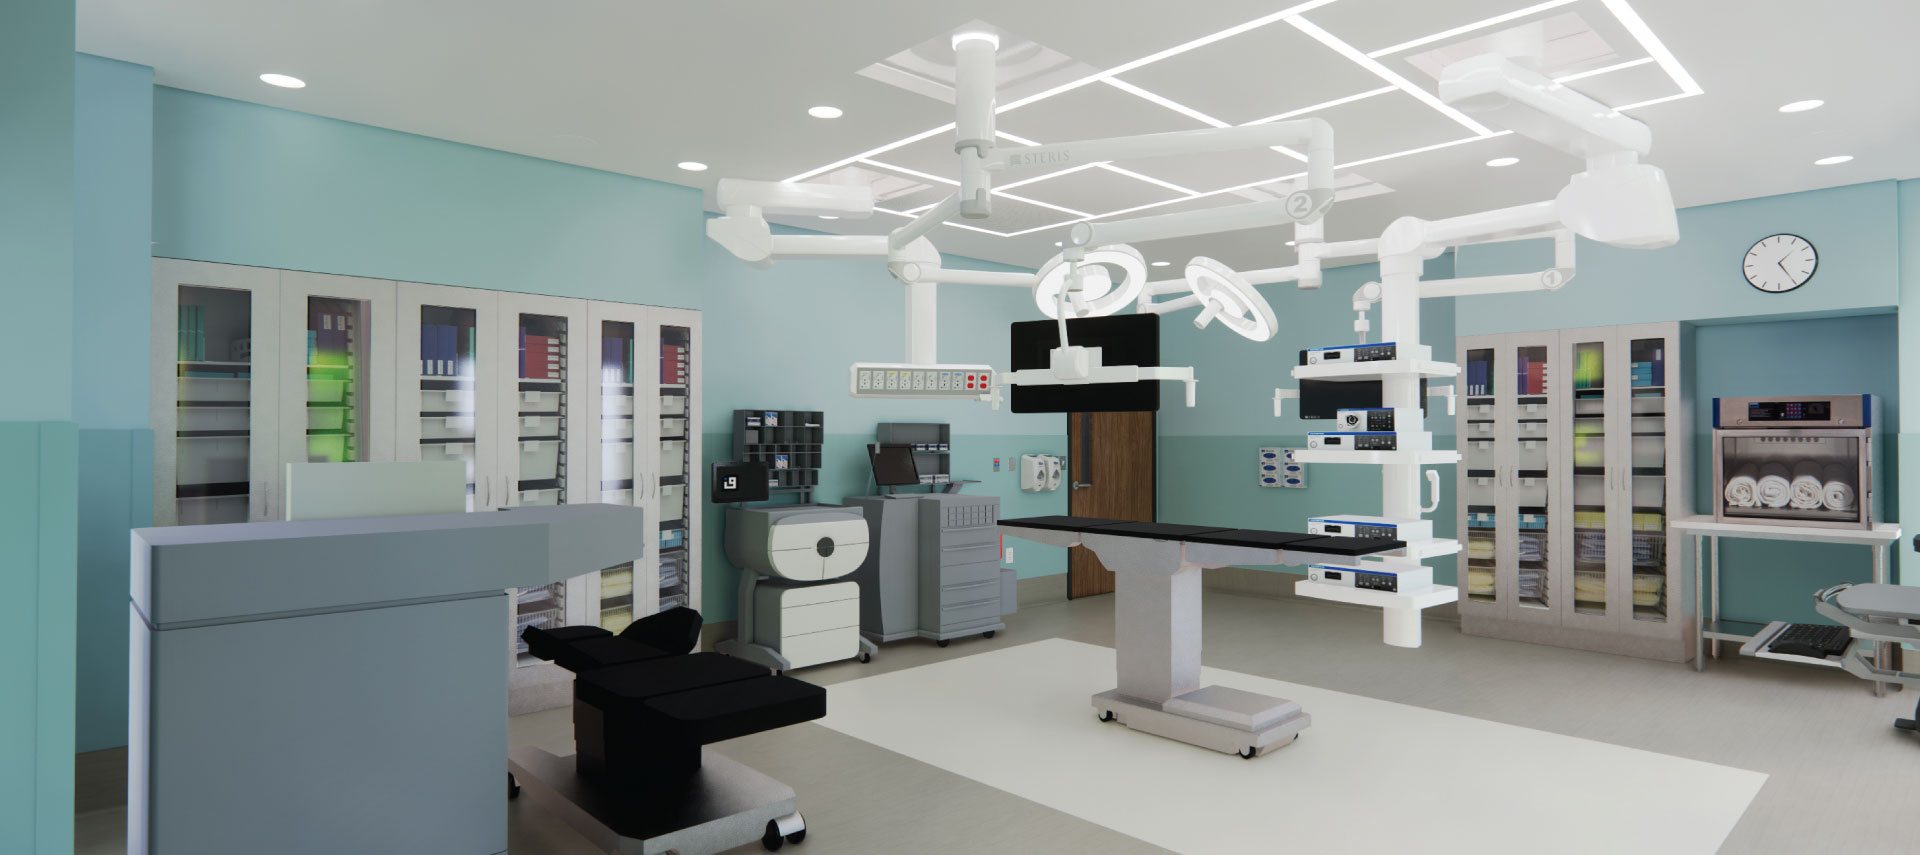 Architect’s rendering of the new eye procedure room being built at Community Hospital, thanks to a gift to Montage Health Foundation from Marvin Silverman of Carmel.